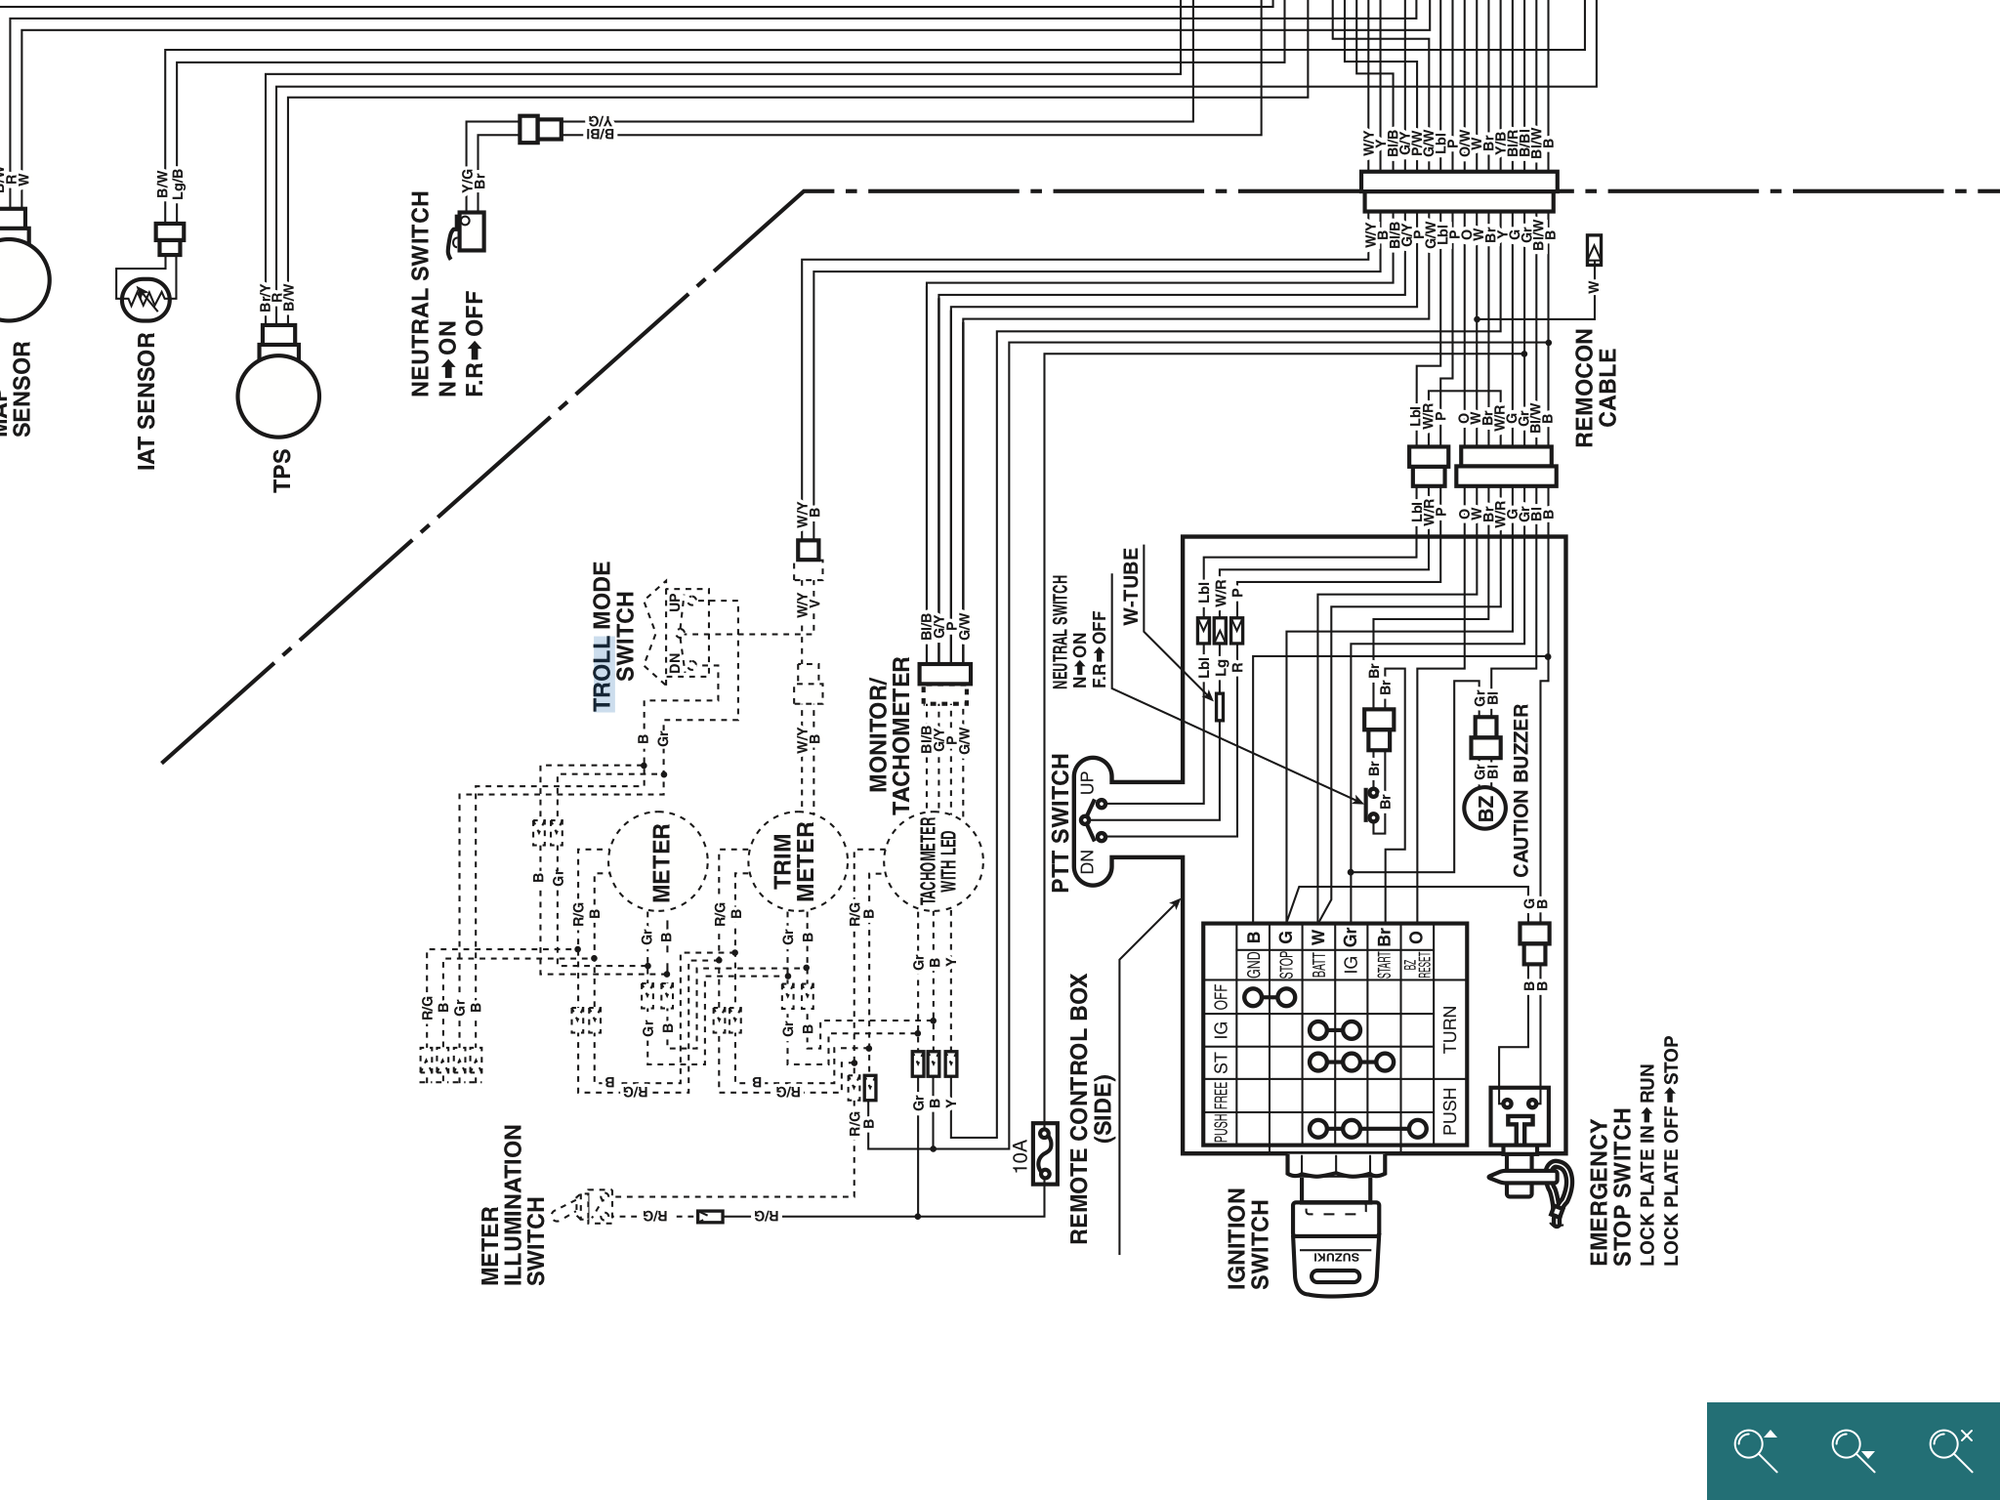 Suzuki Troll Mode Switch Wiring - The Hull Truth - Boating and Fishing Forum  Suzuki Outboard Motor Wiring Diagram    The Hull Truth